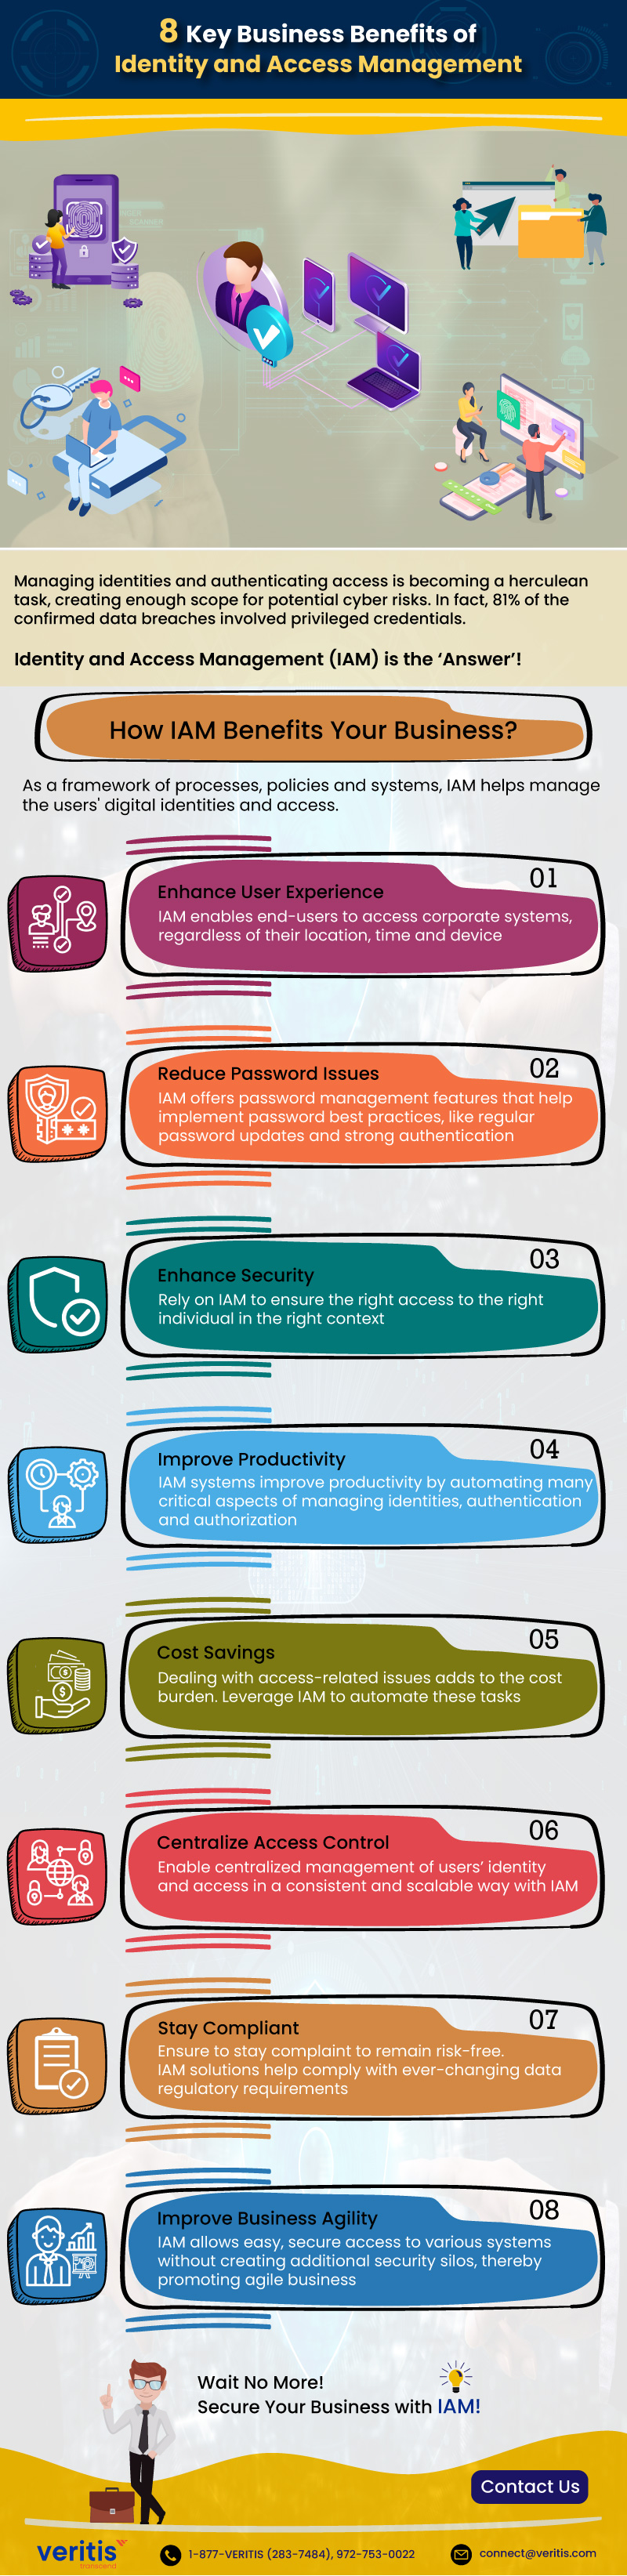 8 Key Business Benefits of Identity and Access Management IT Infographic 